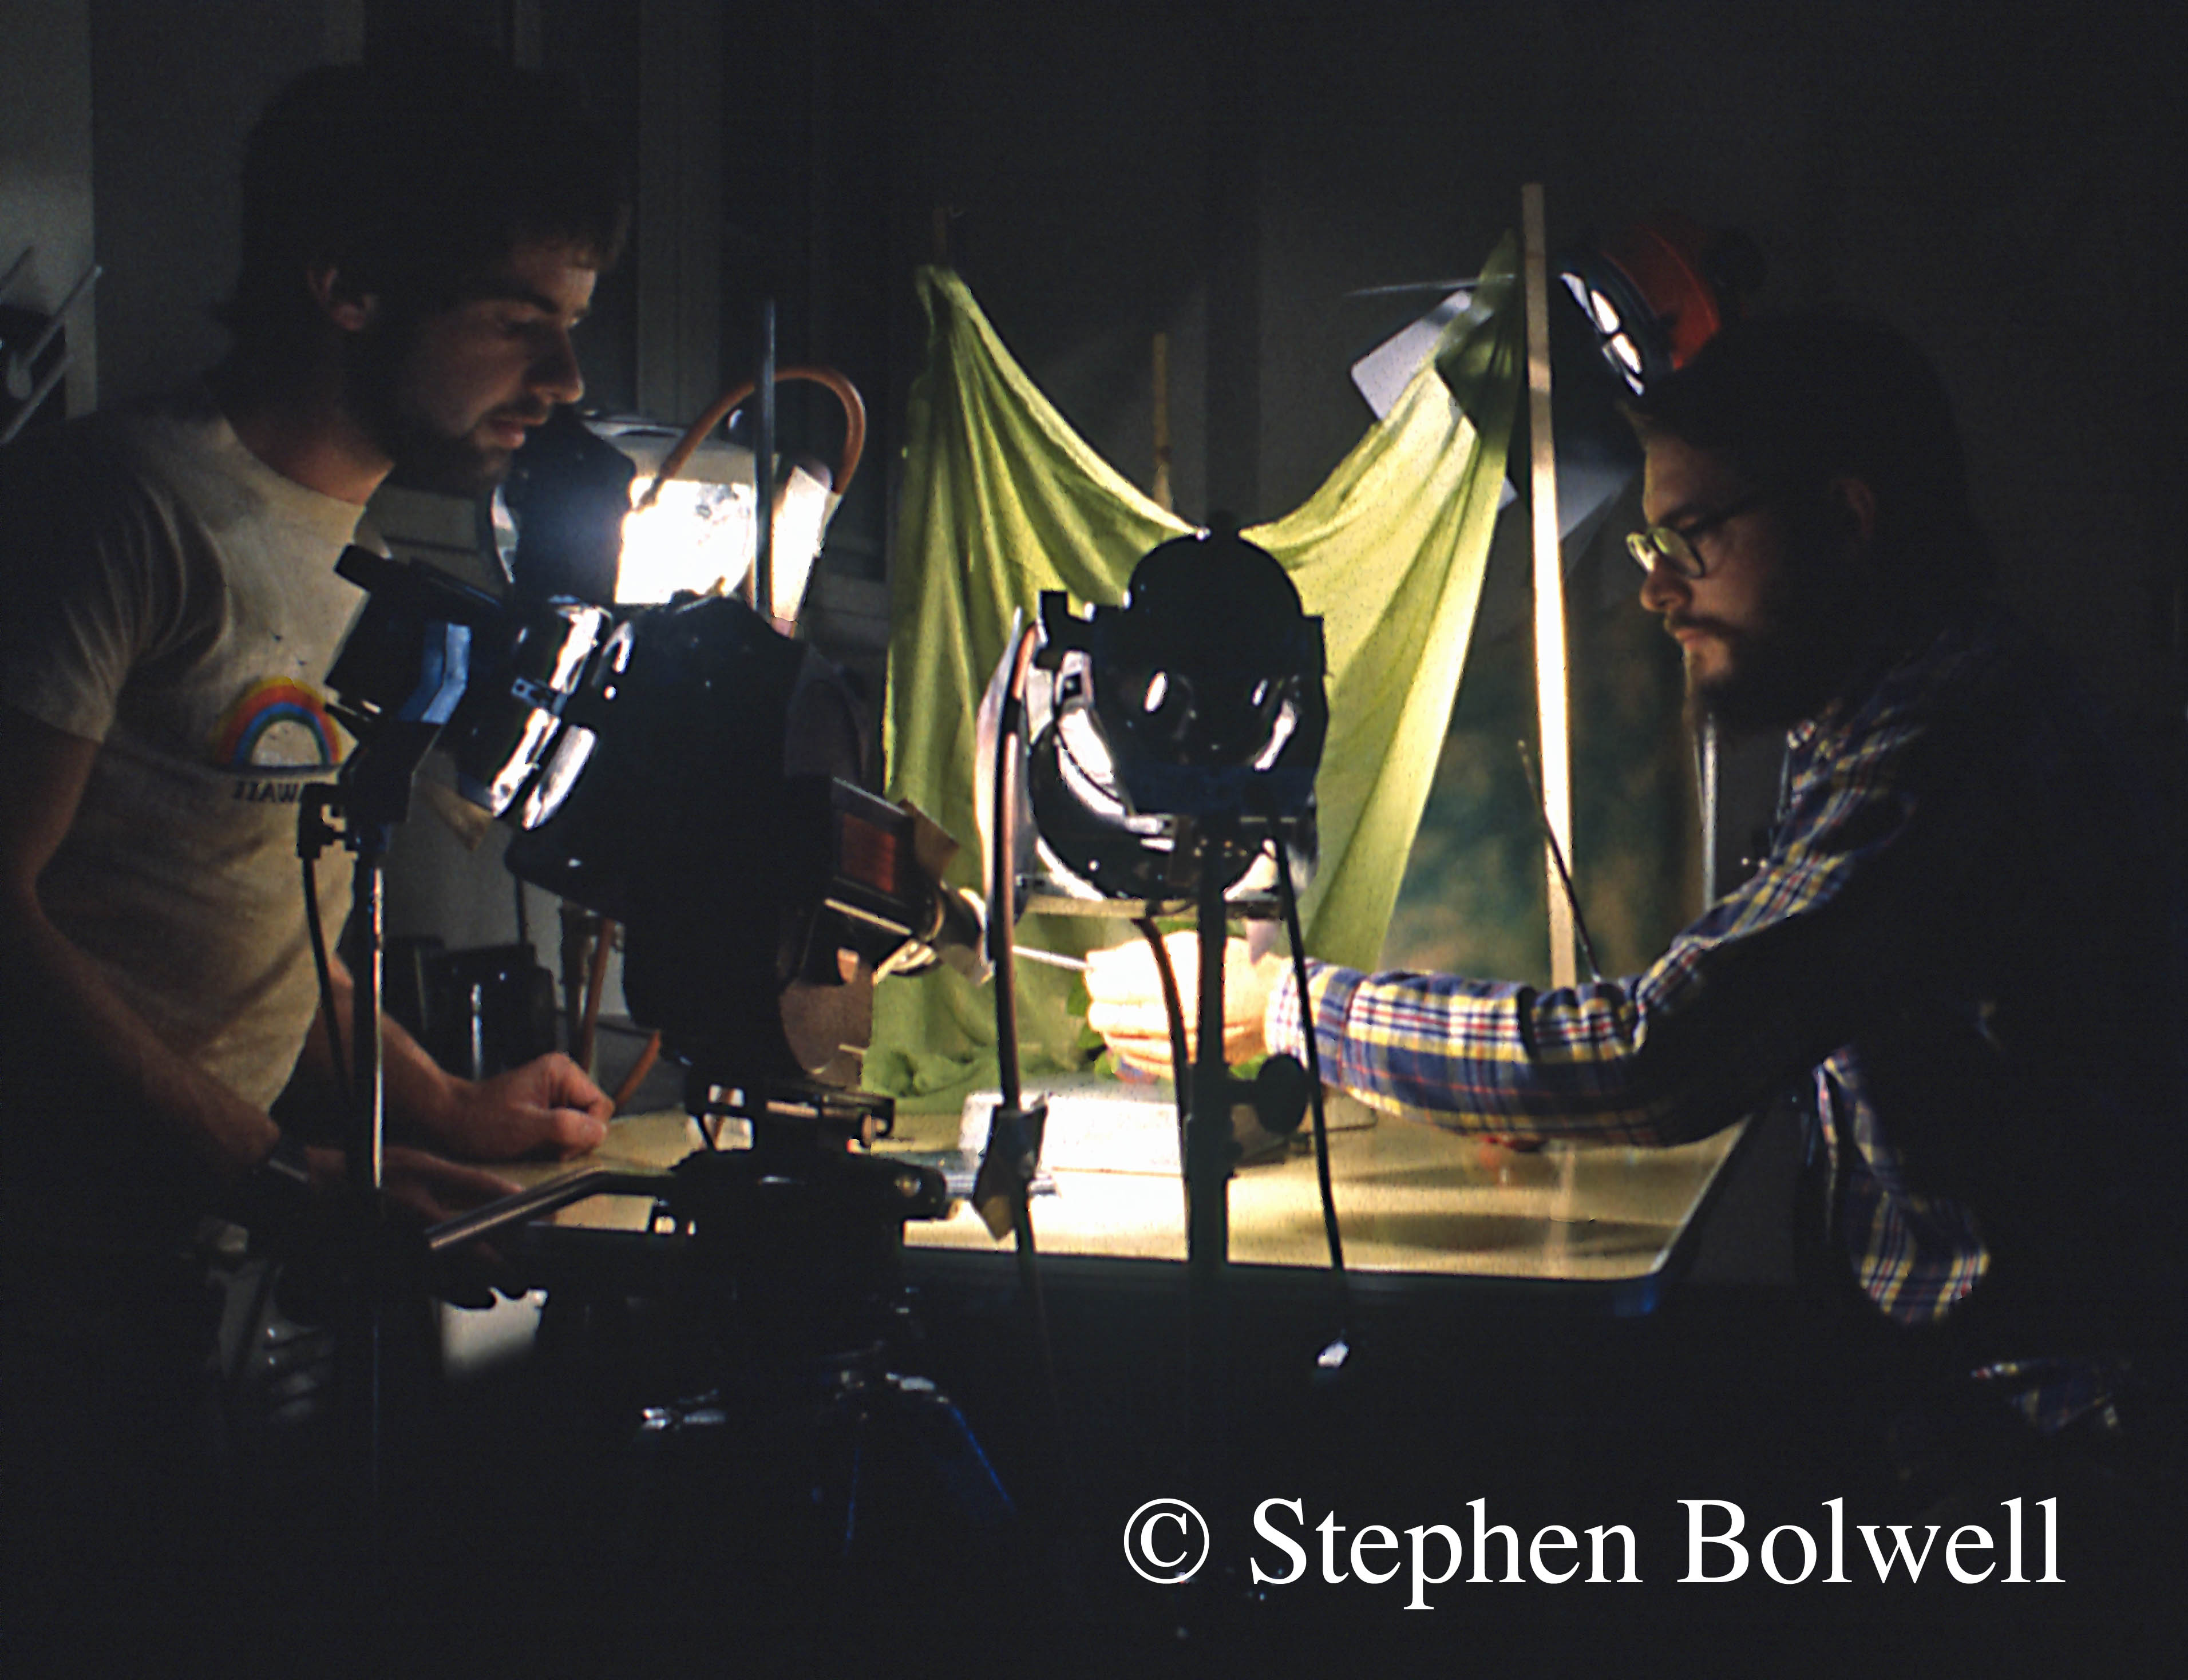 Filming in the lab (way back when) with Steve Montgomery (right). We are checking that the carnivorous caterpillars are happy under my water cooled lighting system - a year later I had the benefit of fibre optic lights.